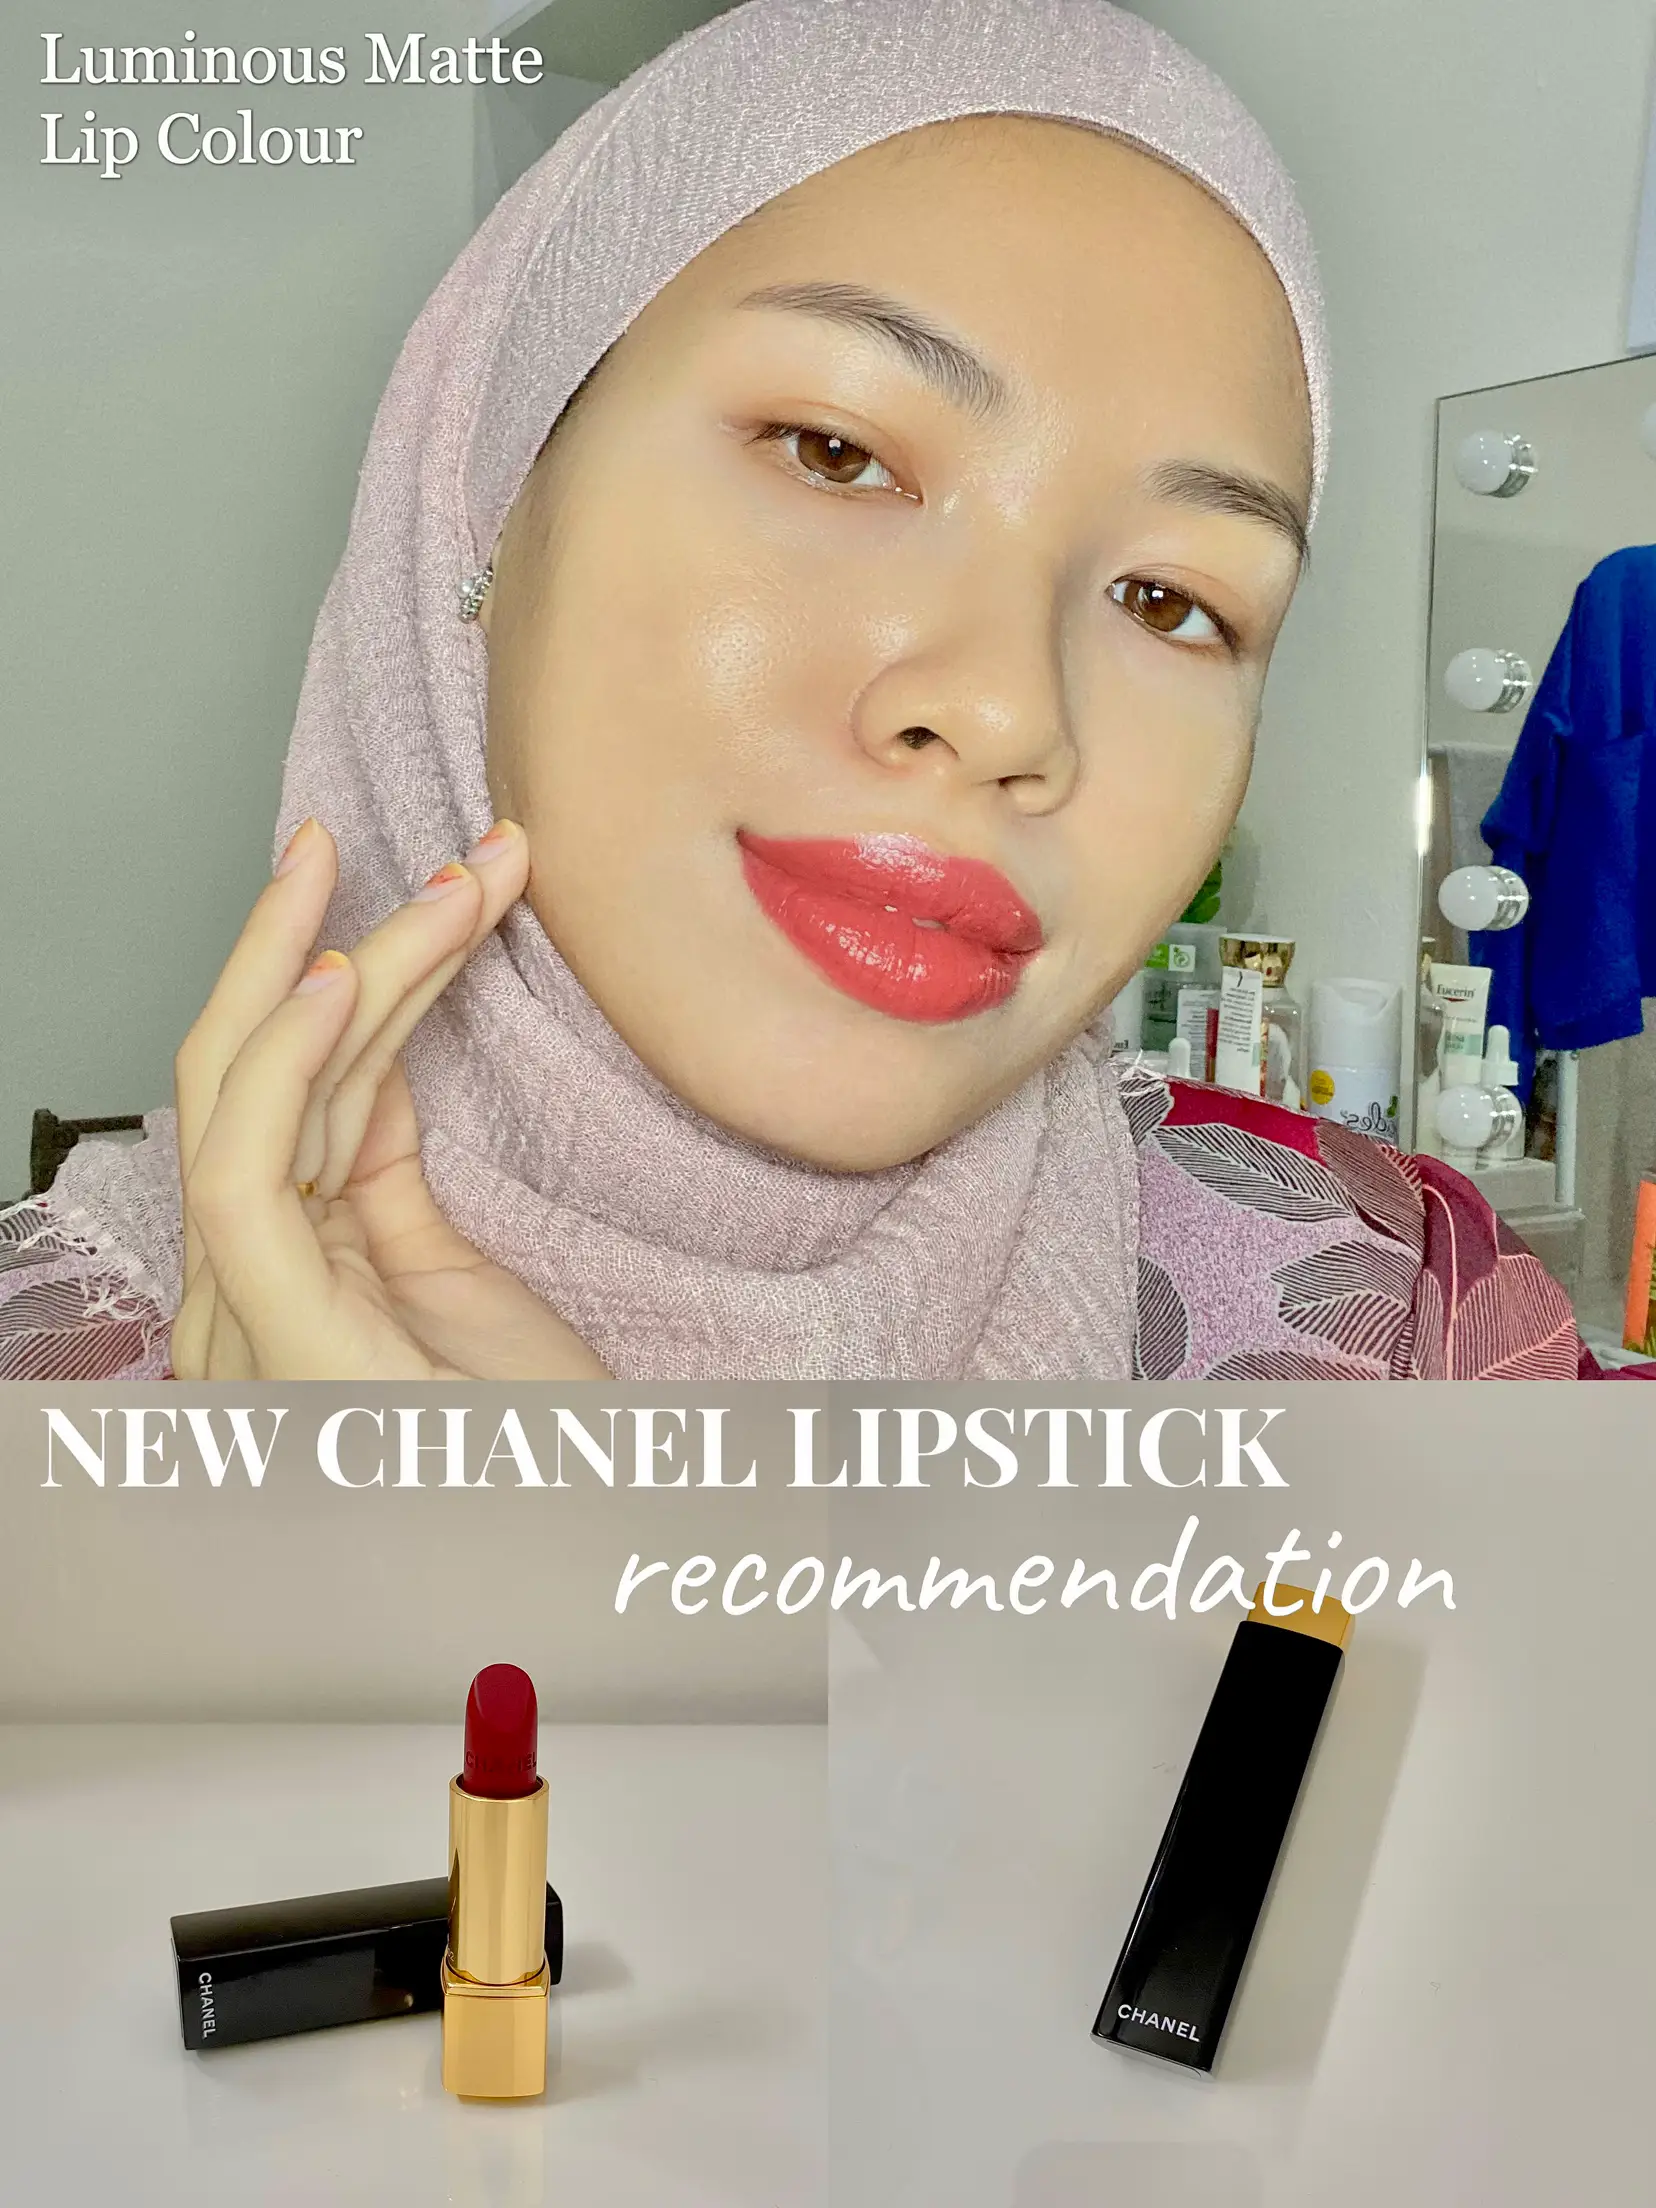 NEW CHANEL LIPSTICK RECOMMENDATION